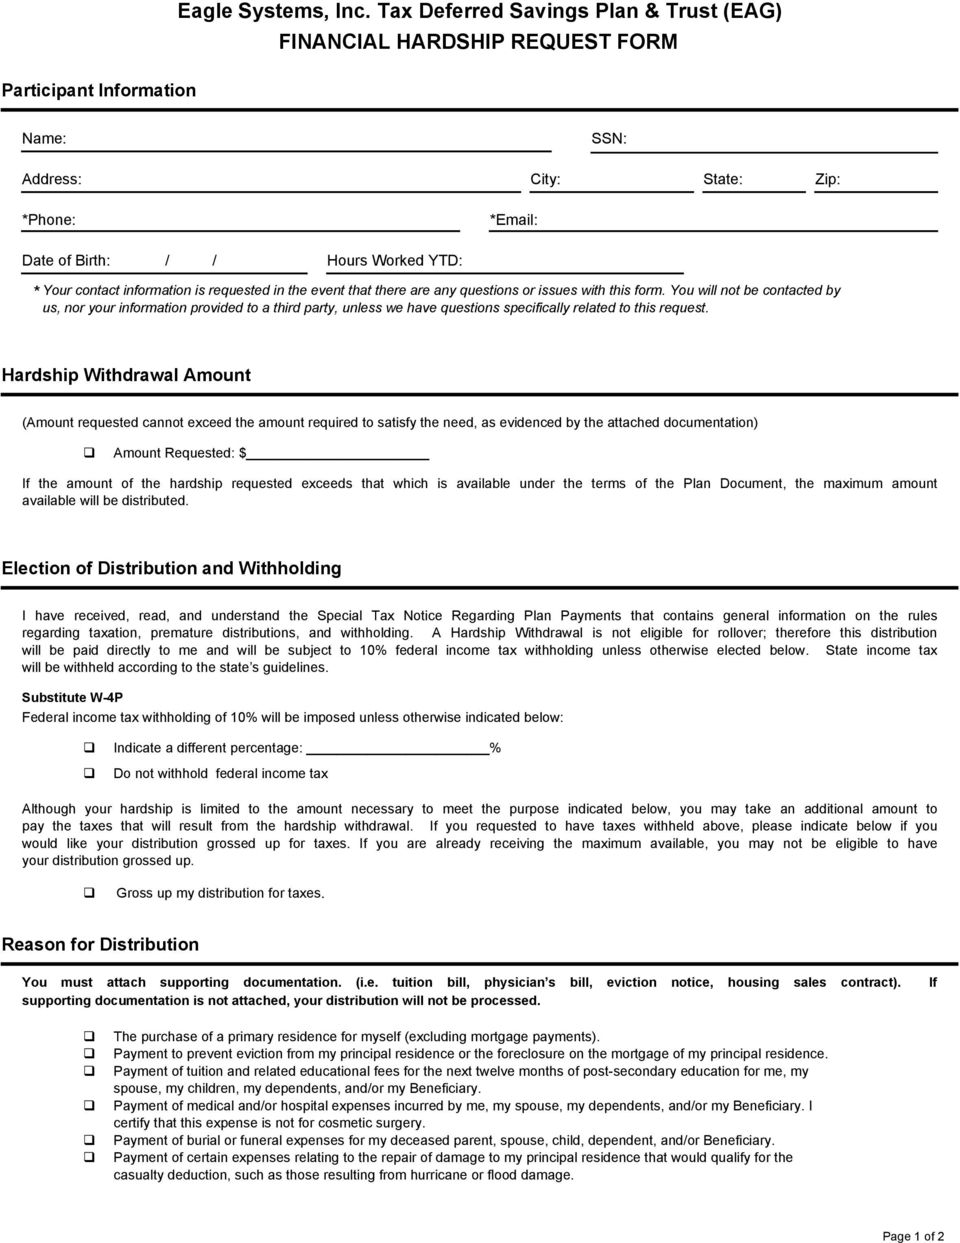 requested in the event that there are any questions or issues with this form.